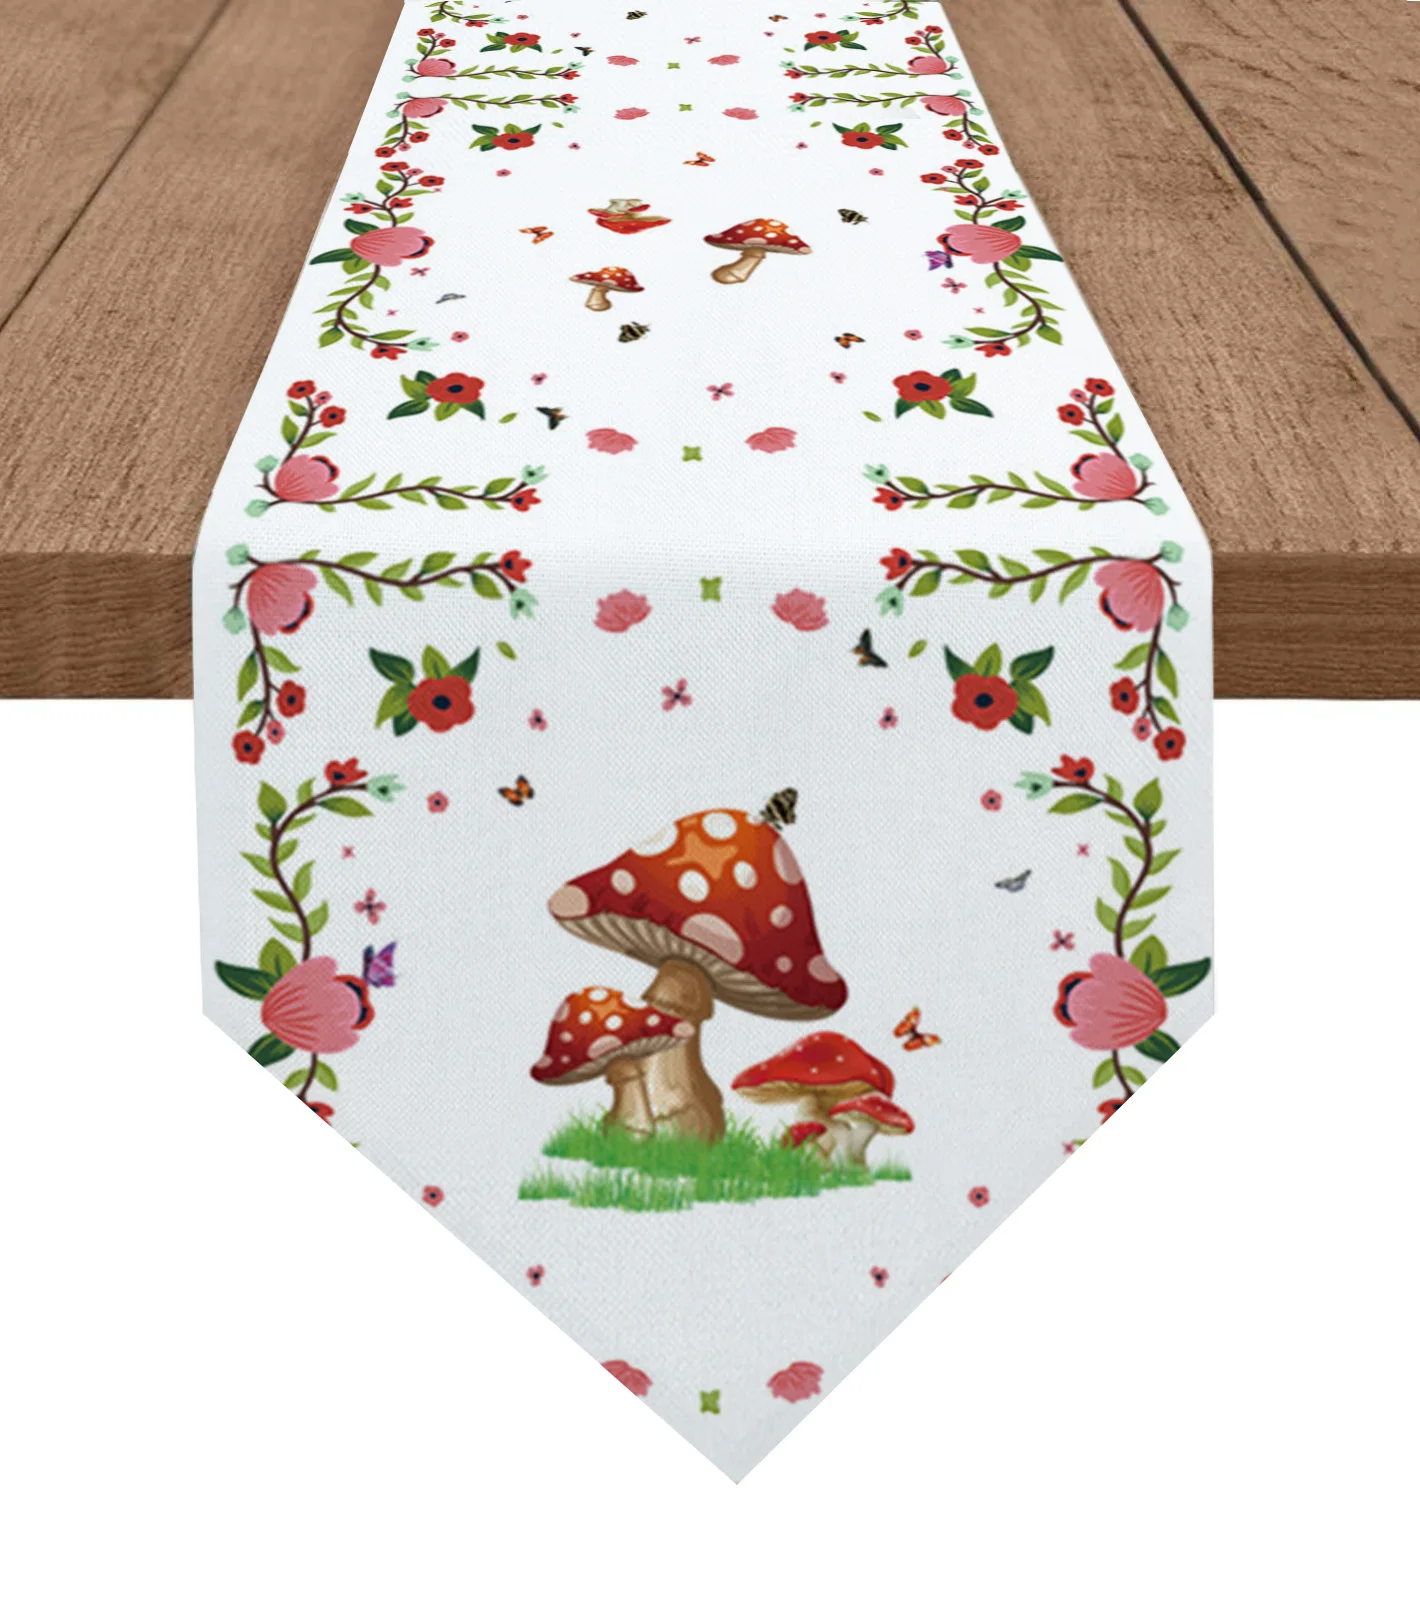 

Flower Butterfly Mushroom Table Runners Printed Coffee Tablecloth Wedding Decoration Modern Home Party Table Runners